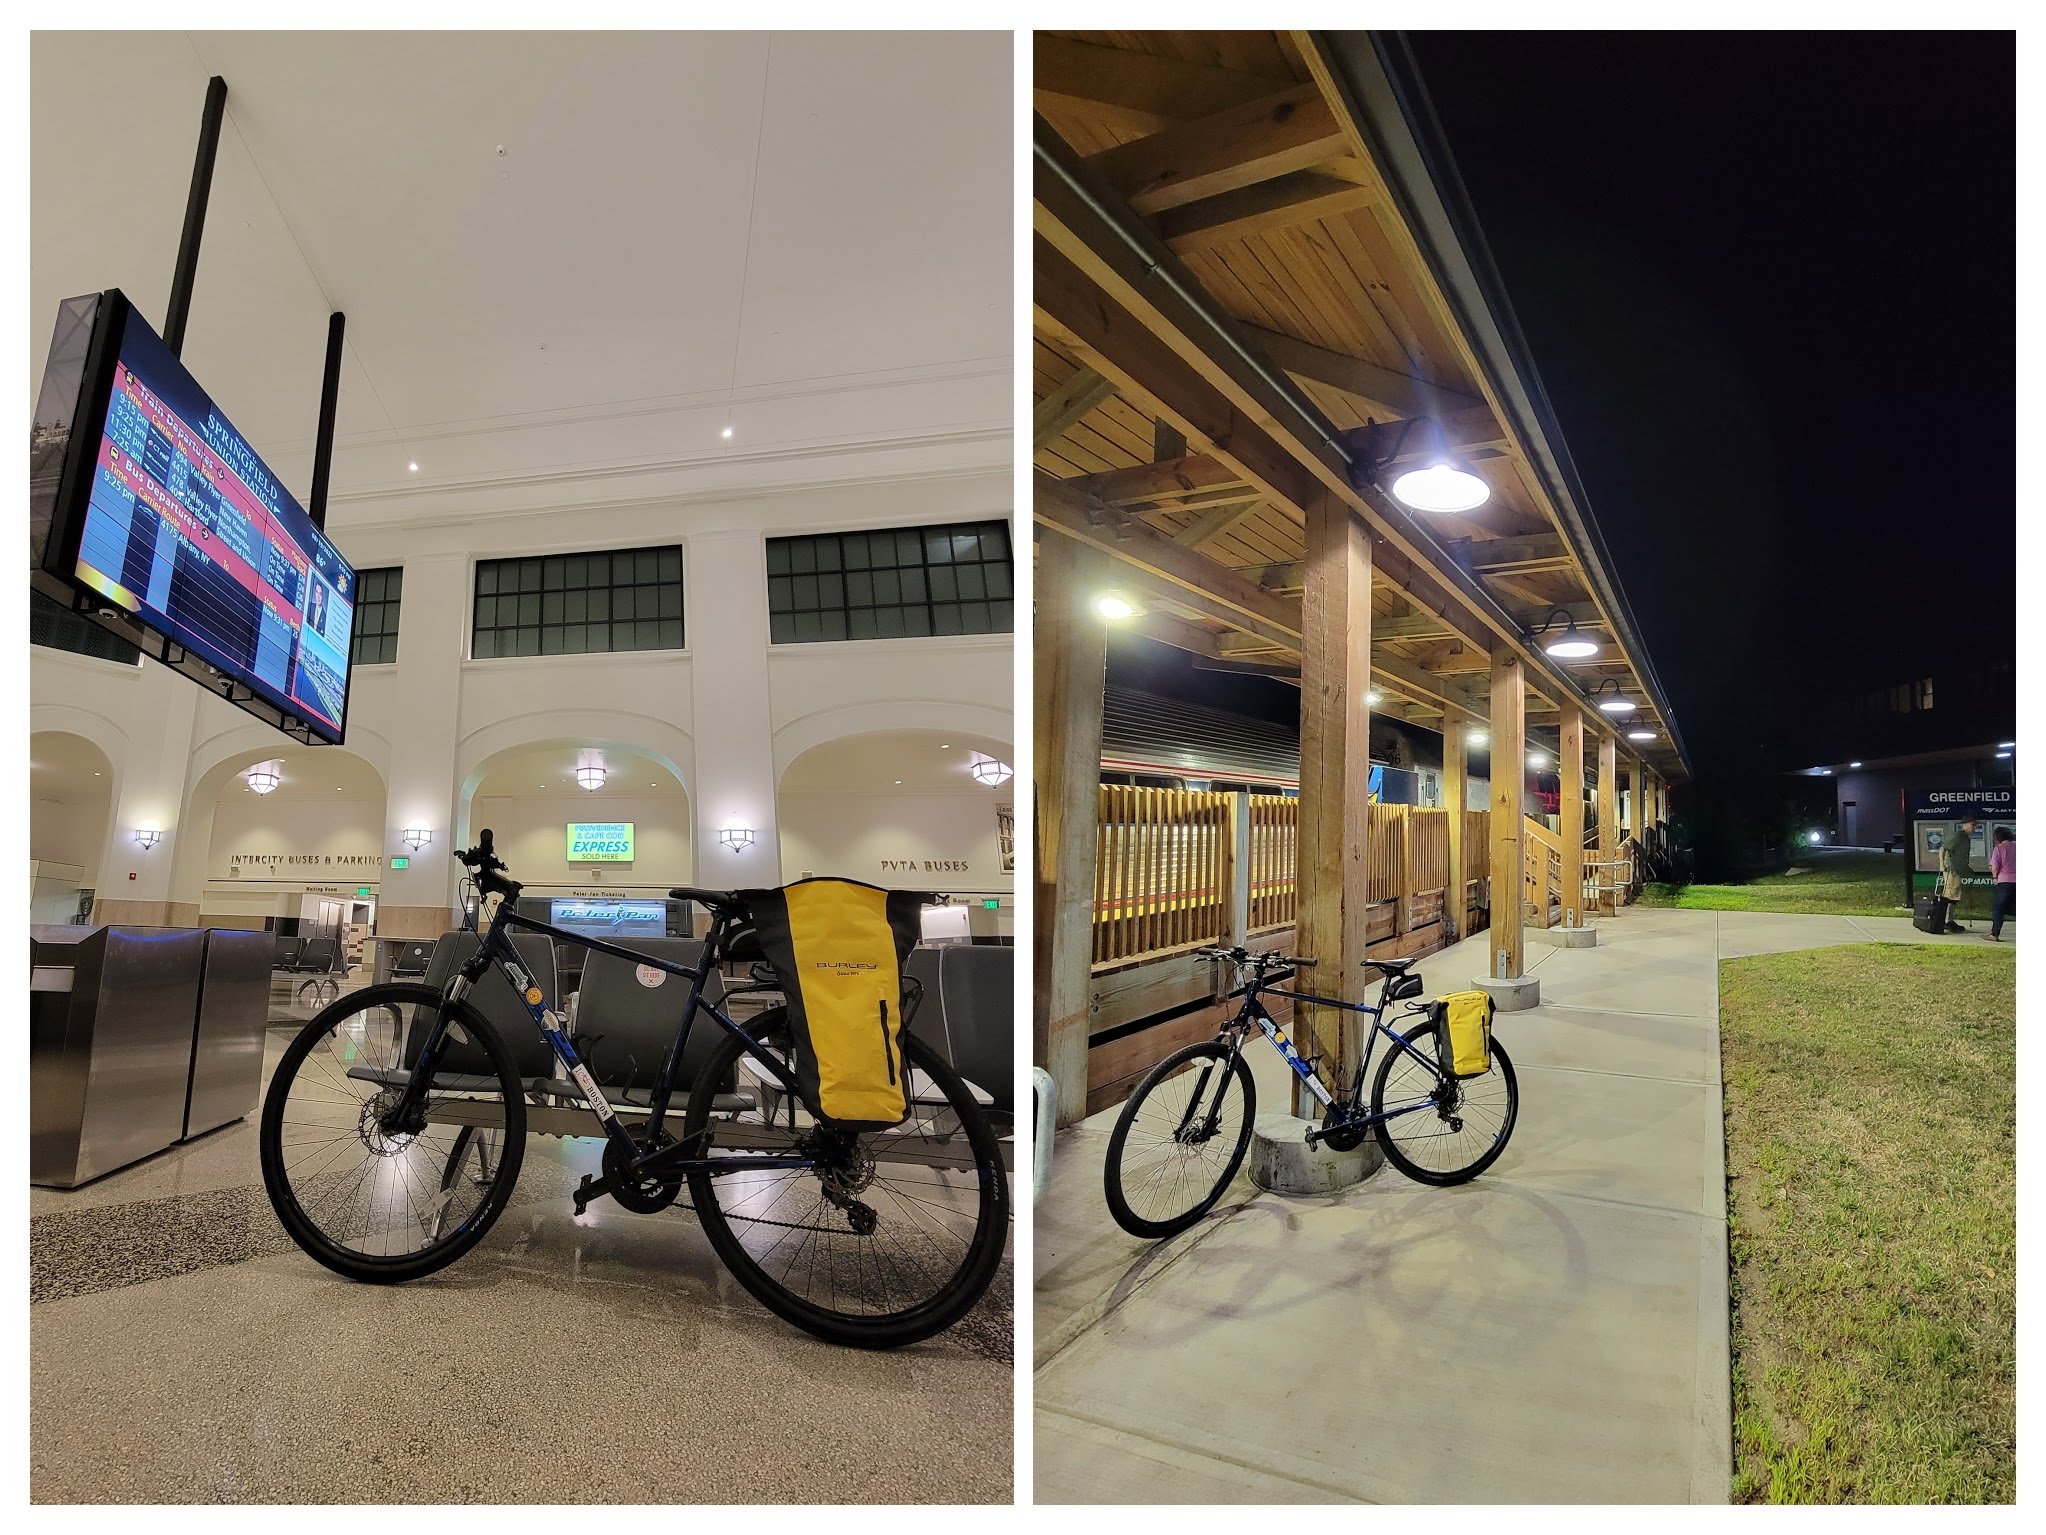 My bike at Springfield Union Station, and again at Greenfield Station